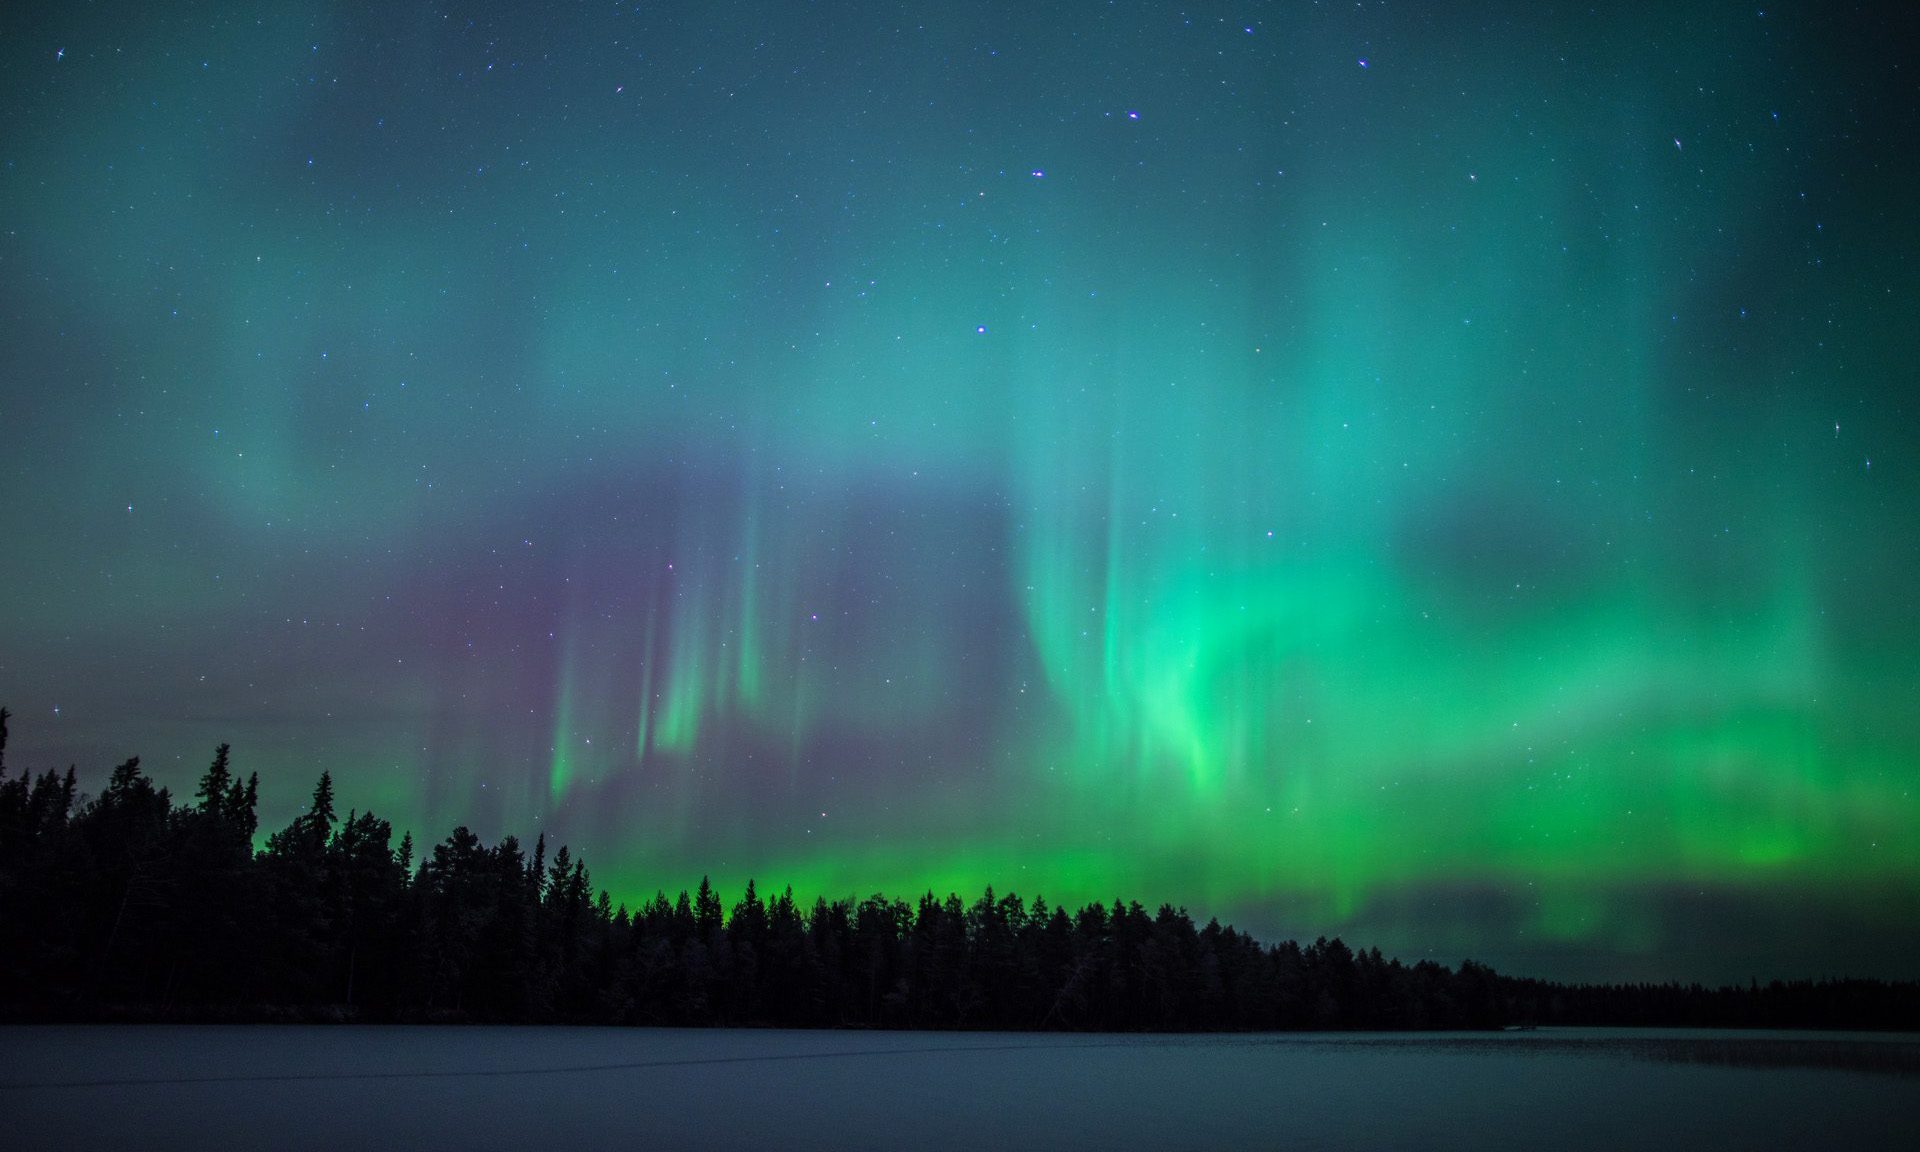 Northern lights dancing on a night sky in Lapland.